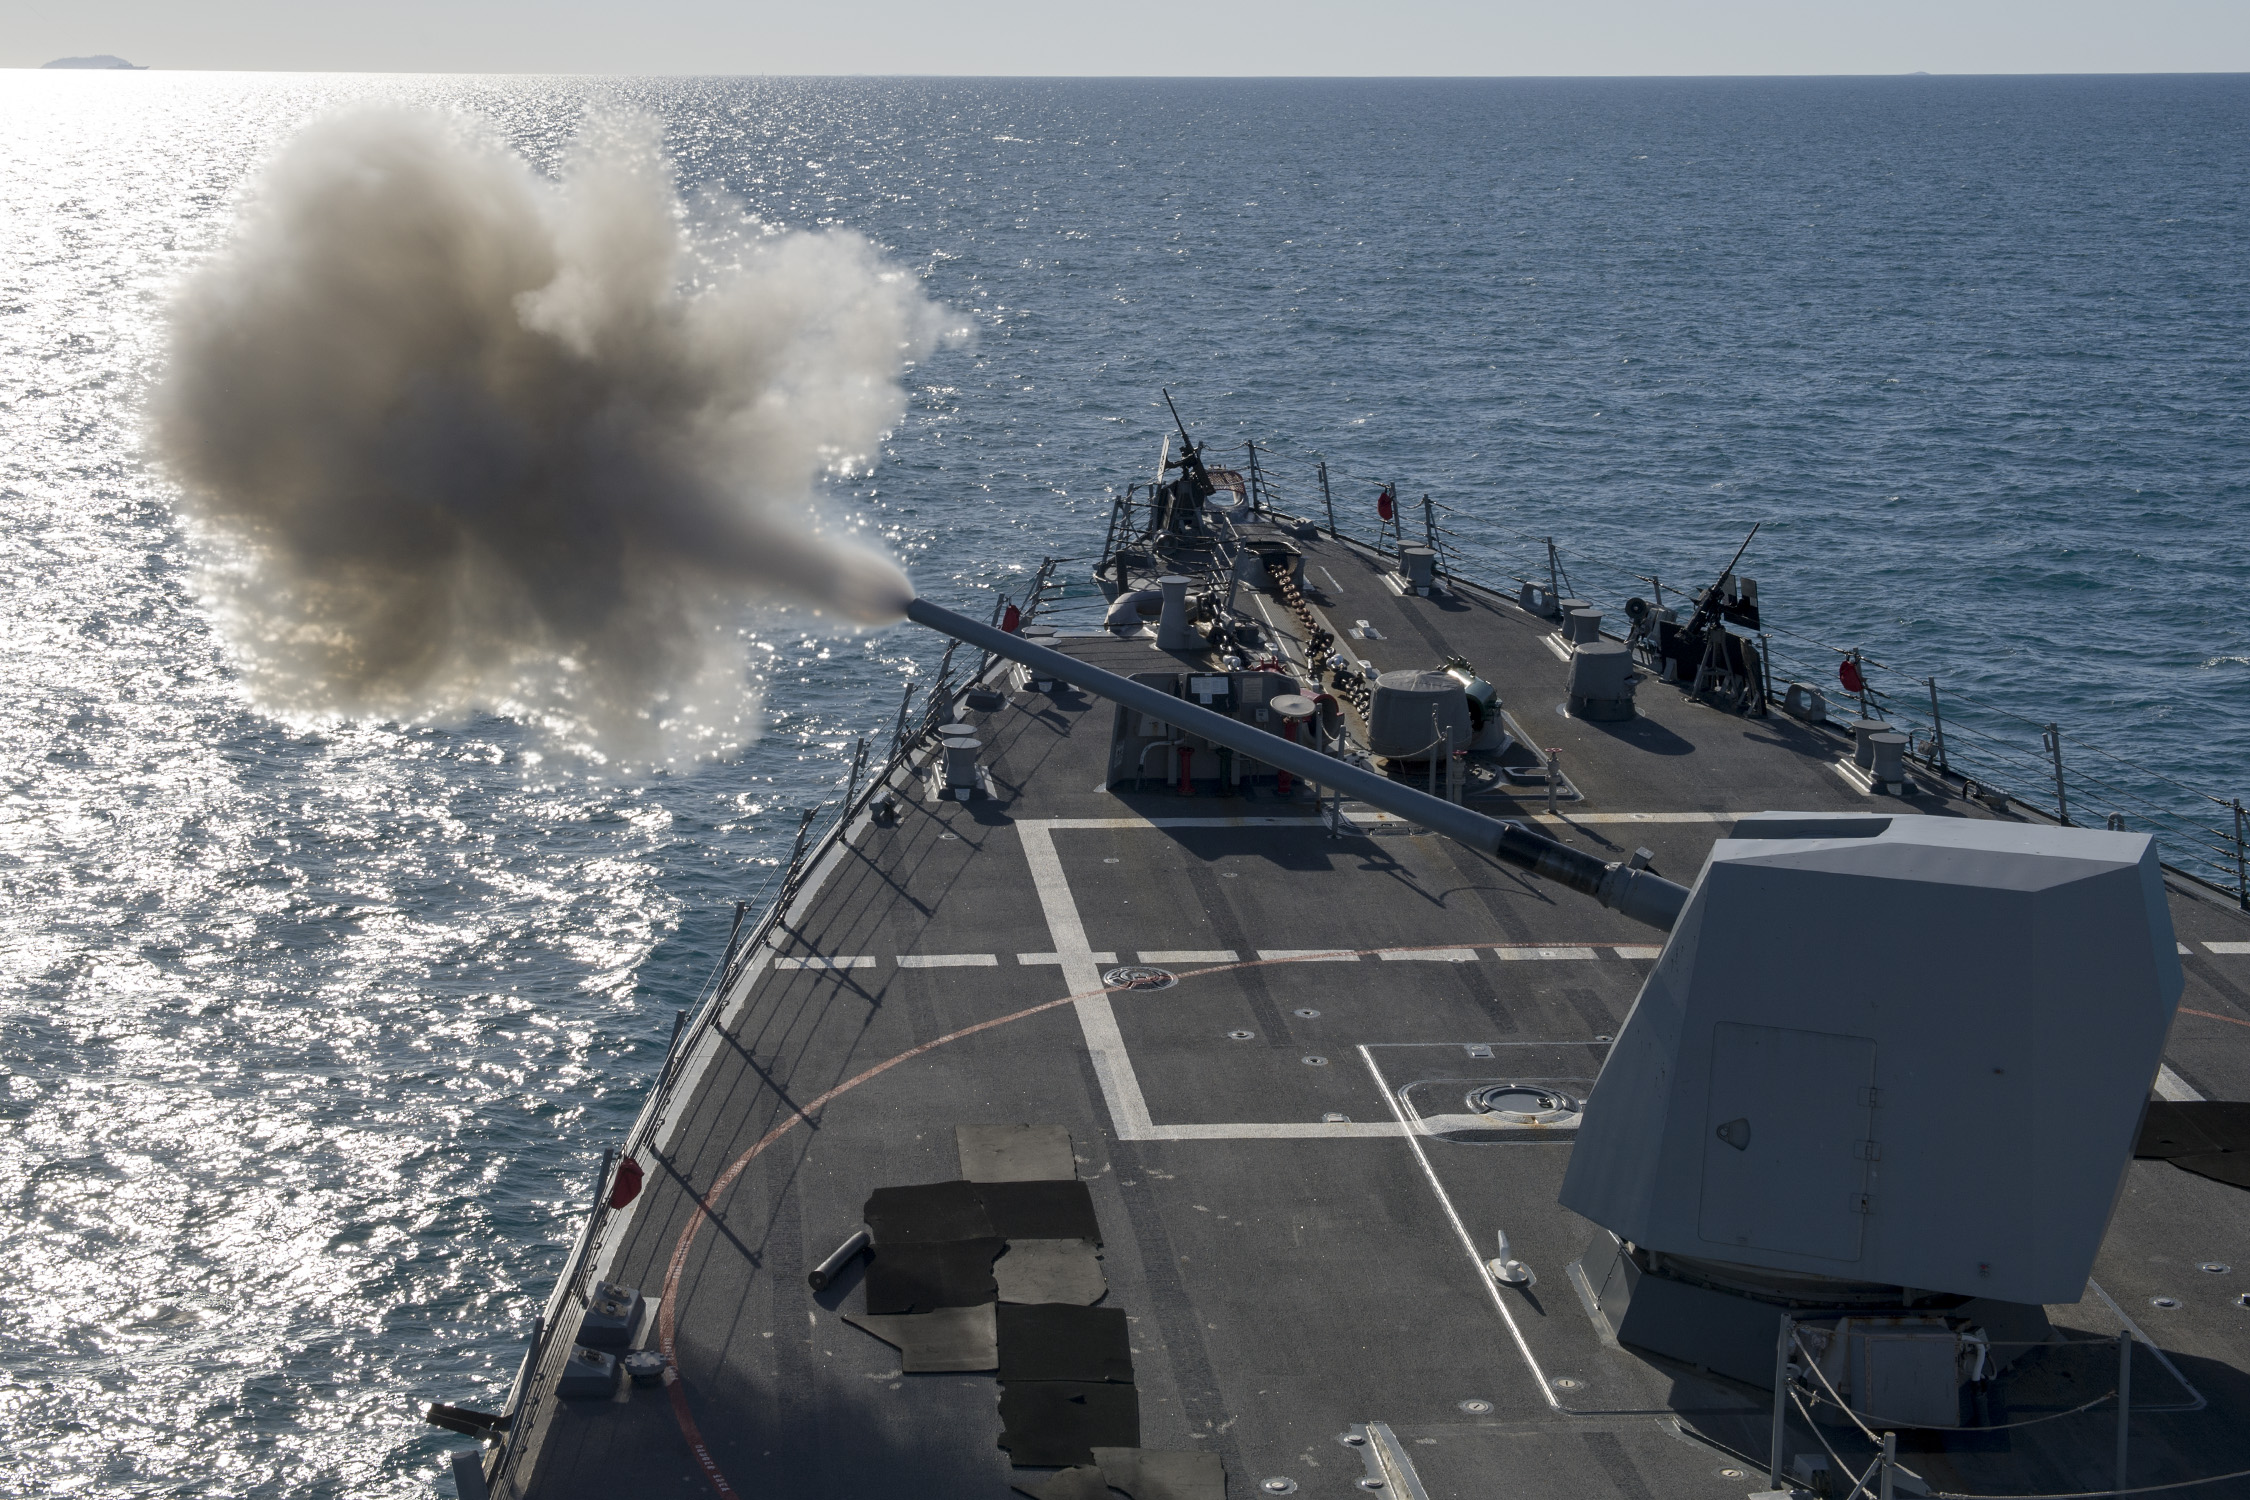 This is an image of a Navy vessel during an explosives training exercise.